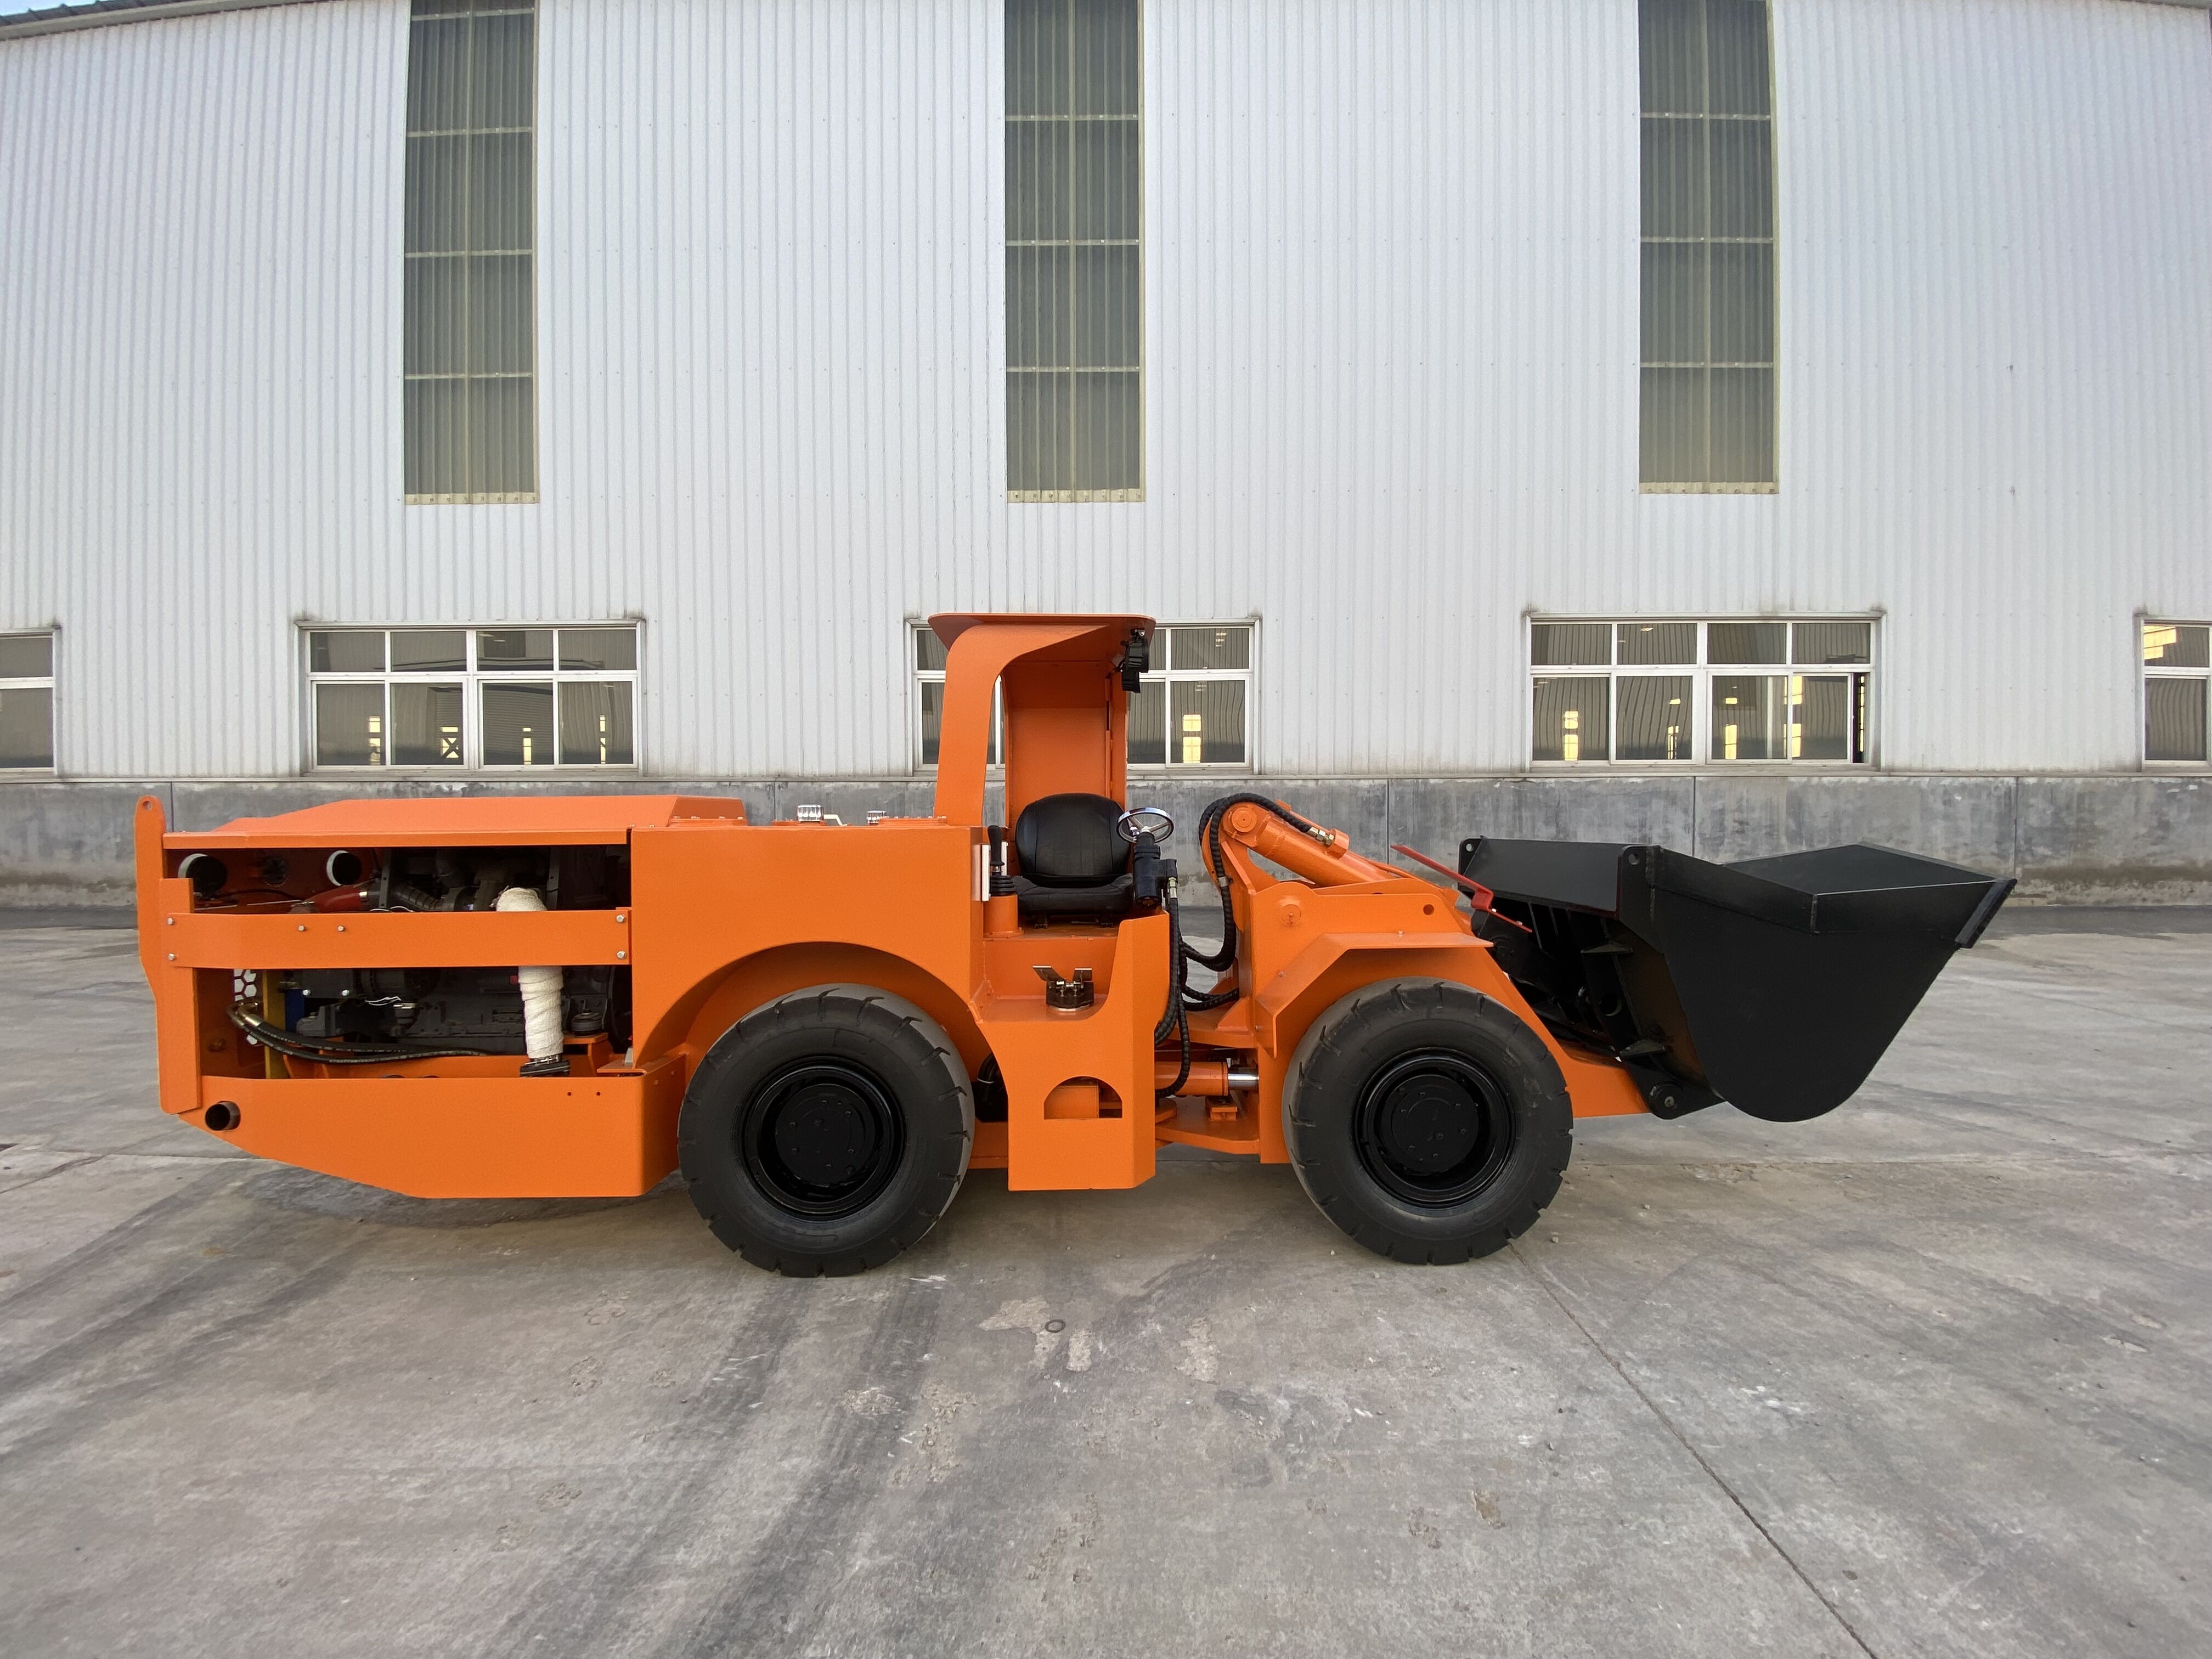 WJ-0.6  0.6 Cubic Meter Wheel Loader for Underground Mining Project, Mini Scoop Tram Featured Image